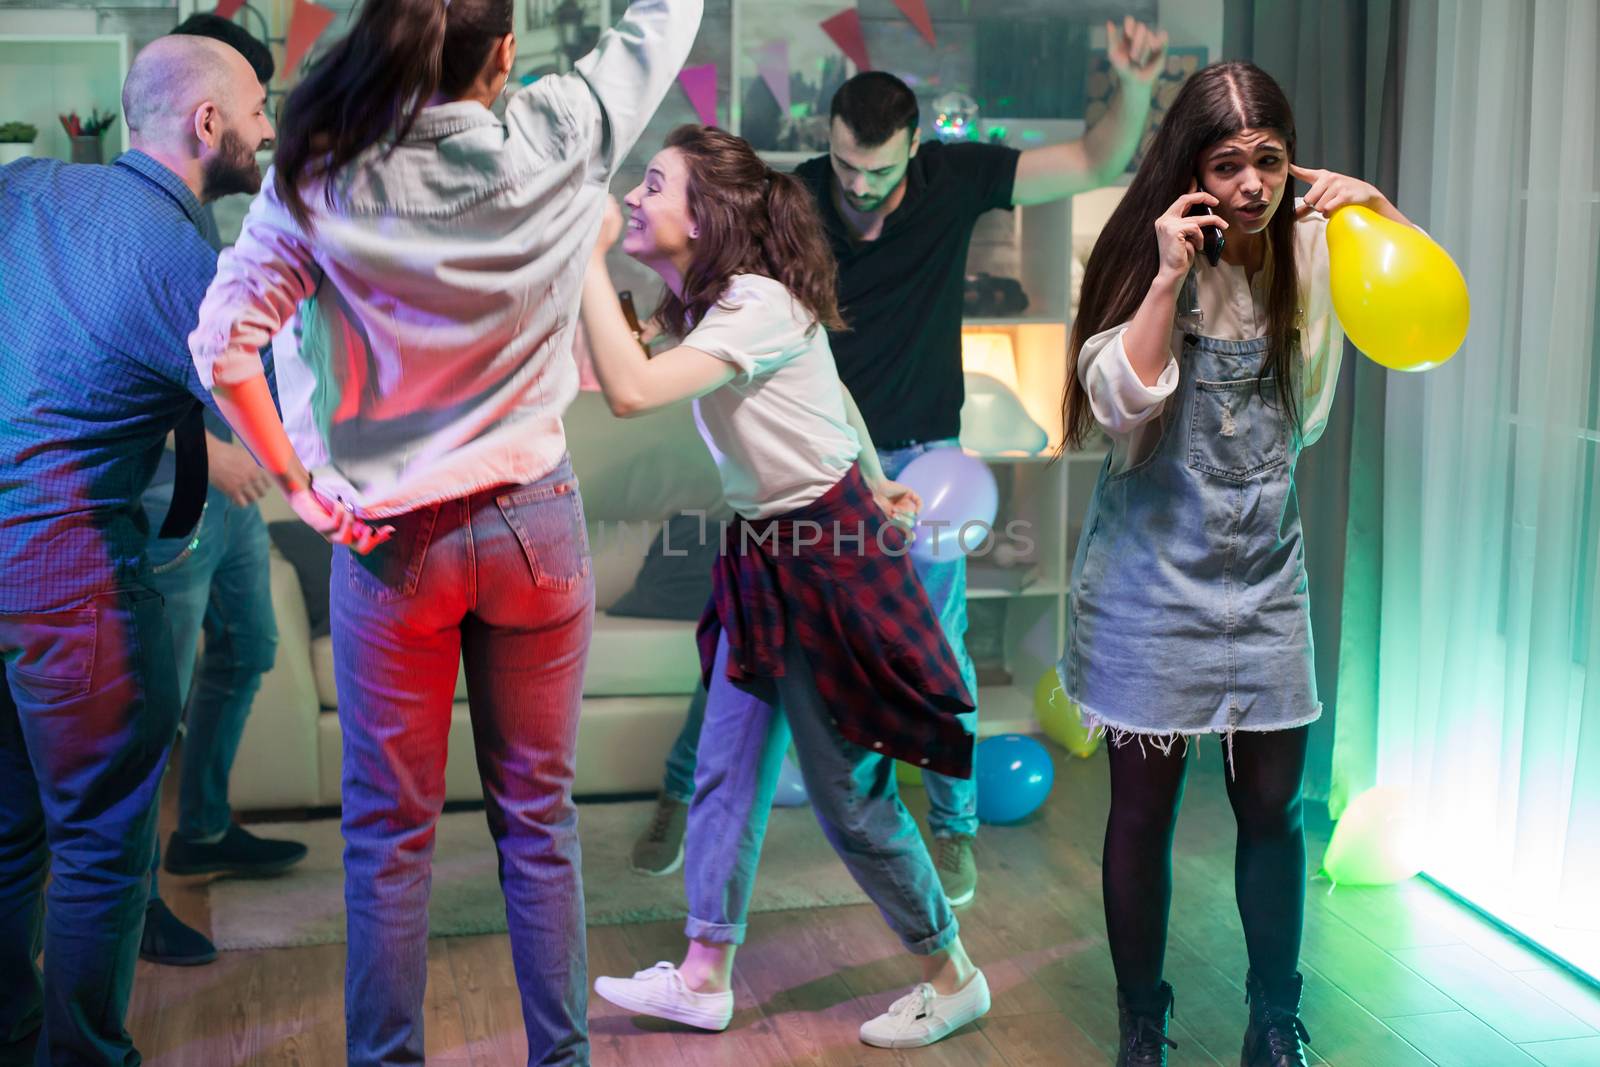 Group of young people dancing at a party while girl trying to have a conversation on her phone.